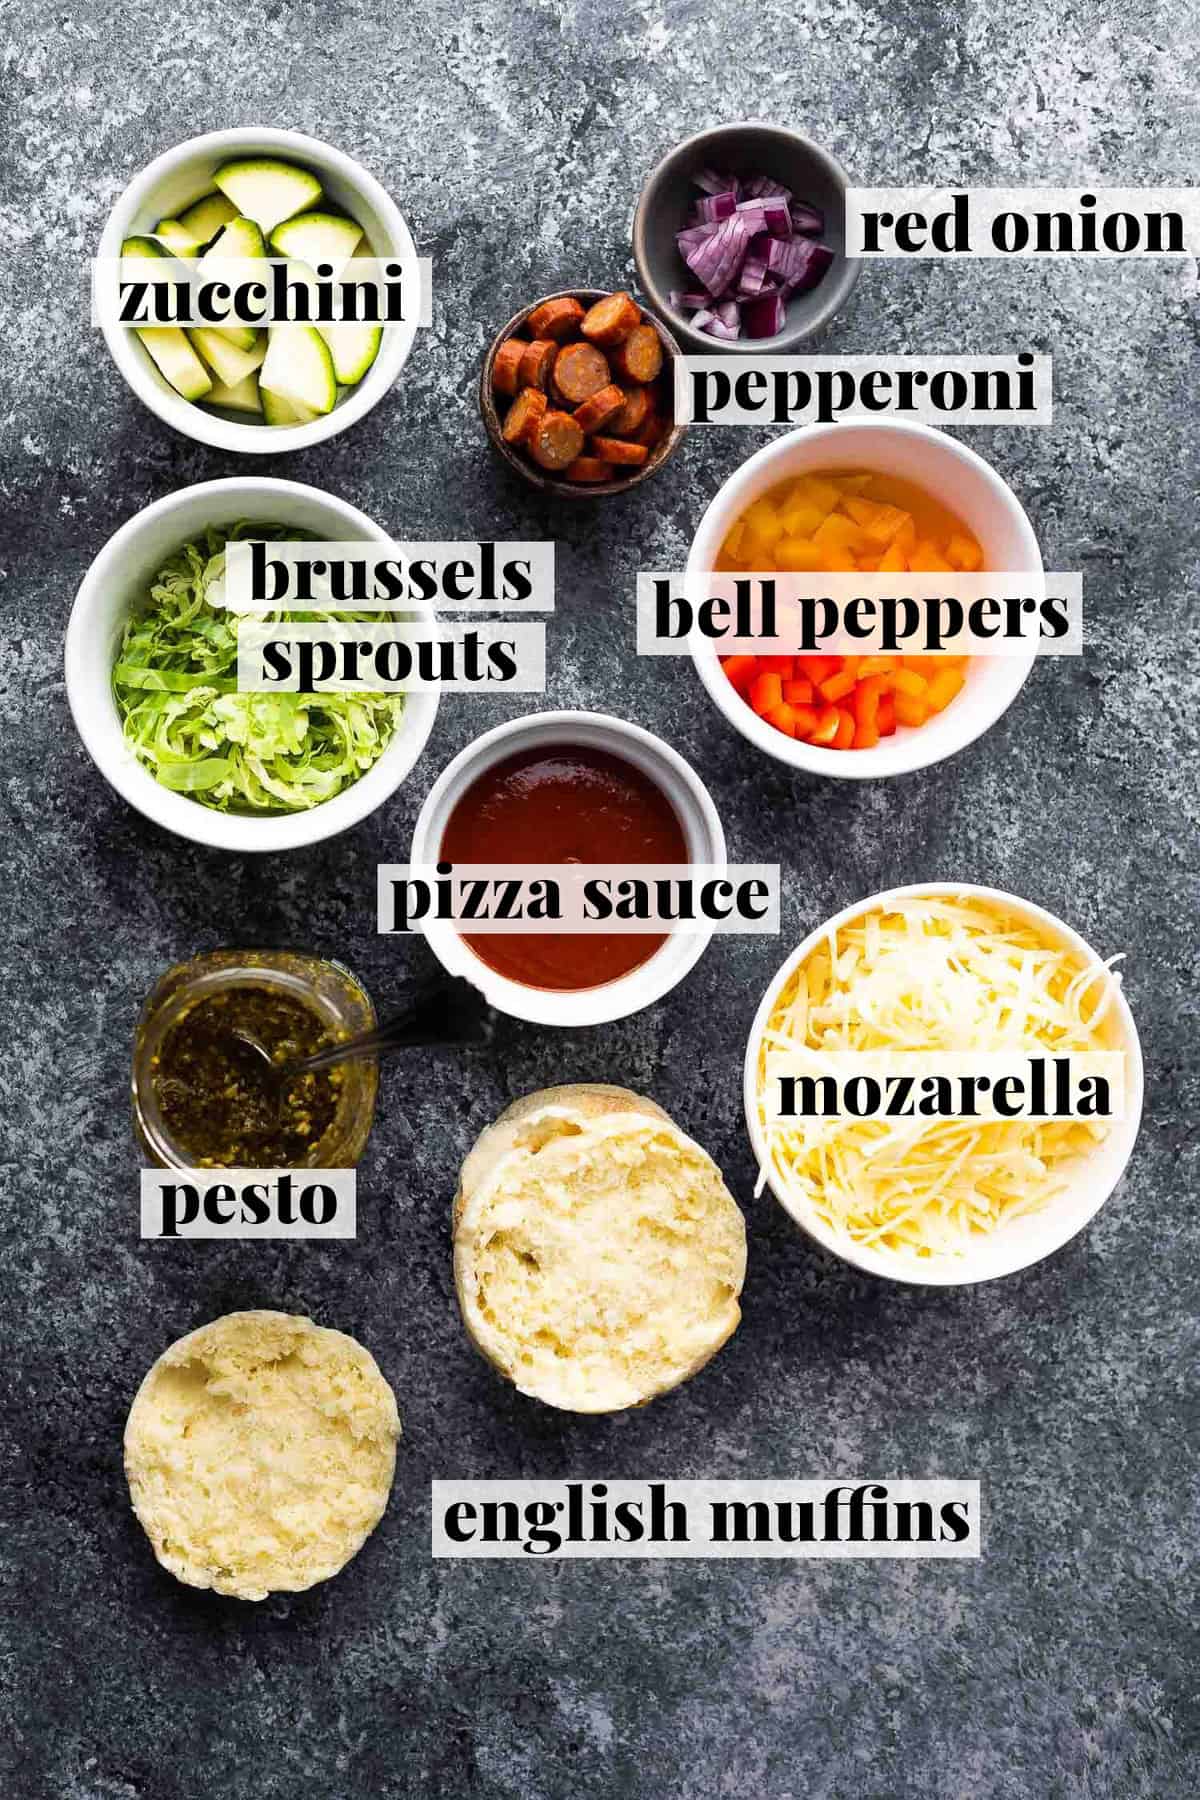 ingredients for pizza in small ramekins on dark surface; including mozarella, bell peppers, pepperoni, red onion, zucchini, brussels sprouts, pesto, and english muffins